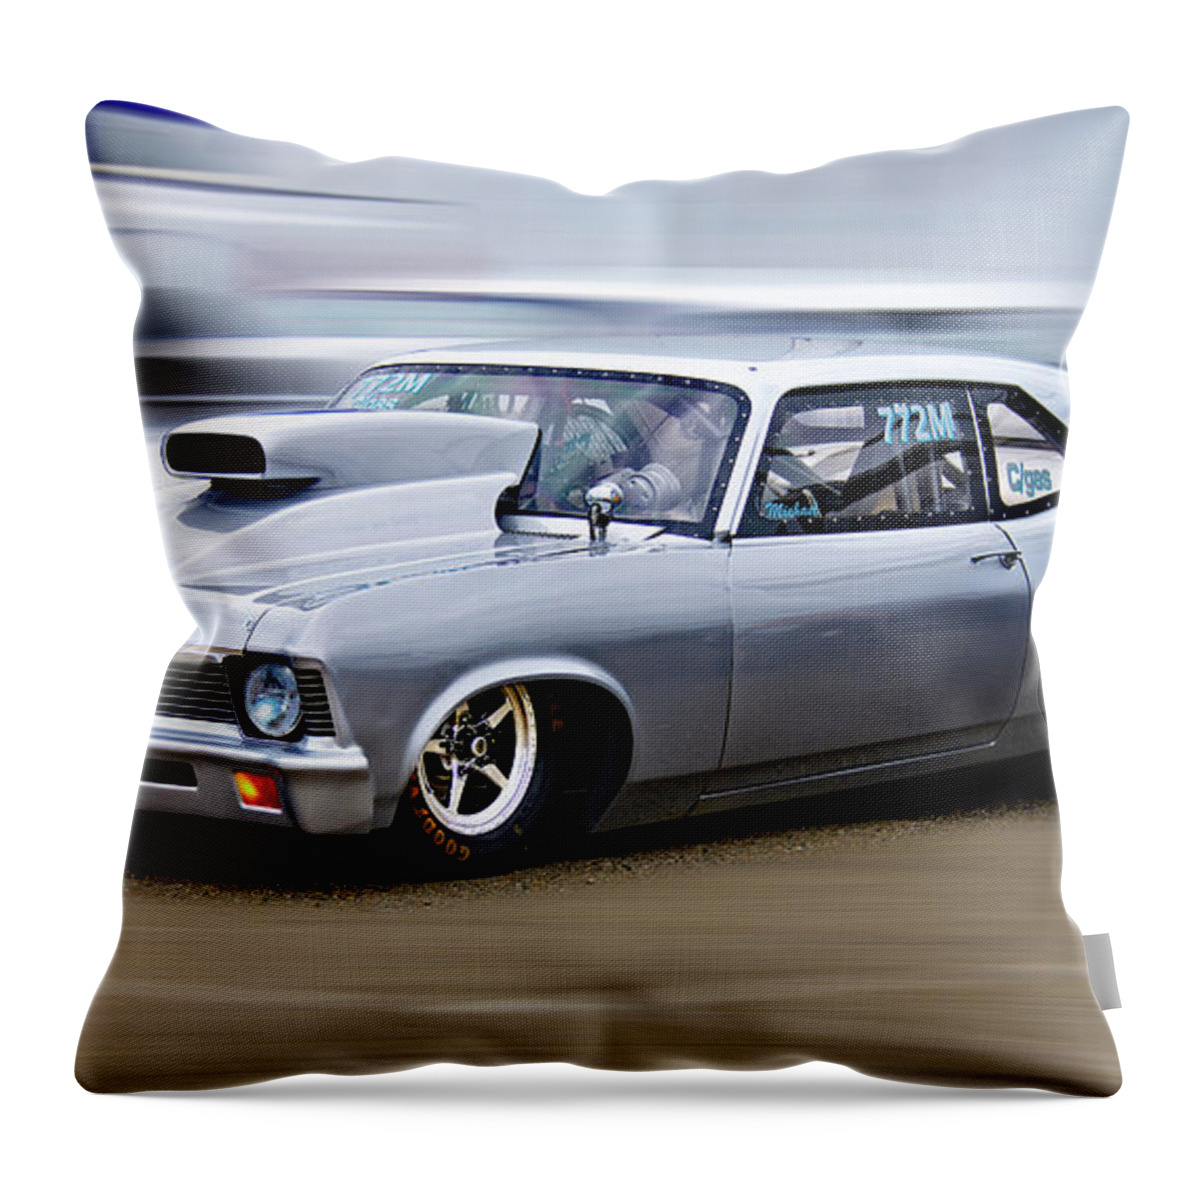 Auto Throw Pillow featuring the photograph 1969 Chevrolet Nova 'C Gas' Dragster by Dave Koontz